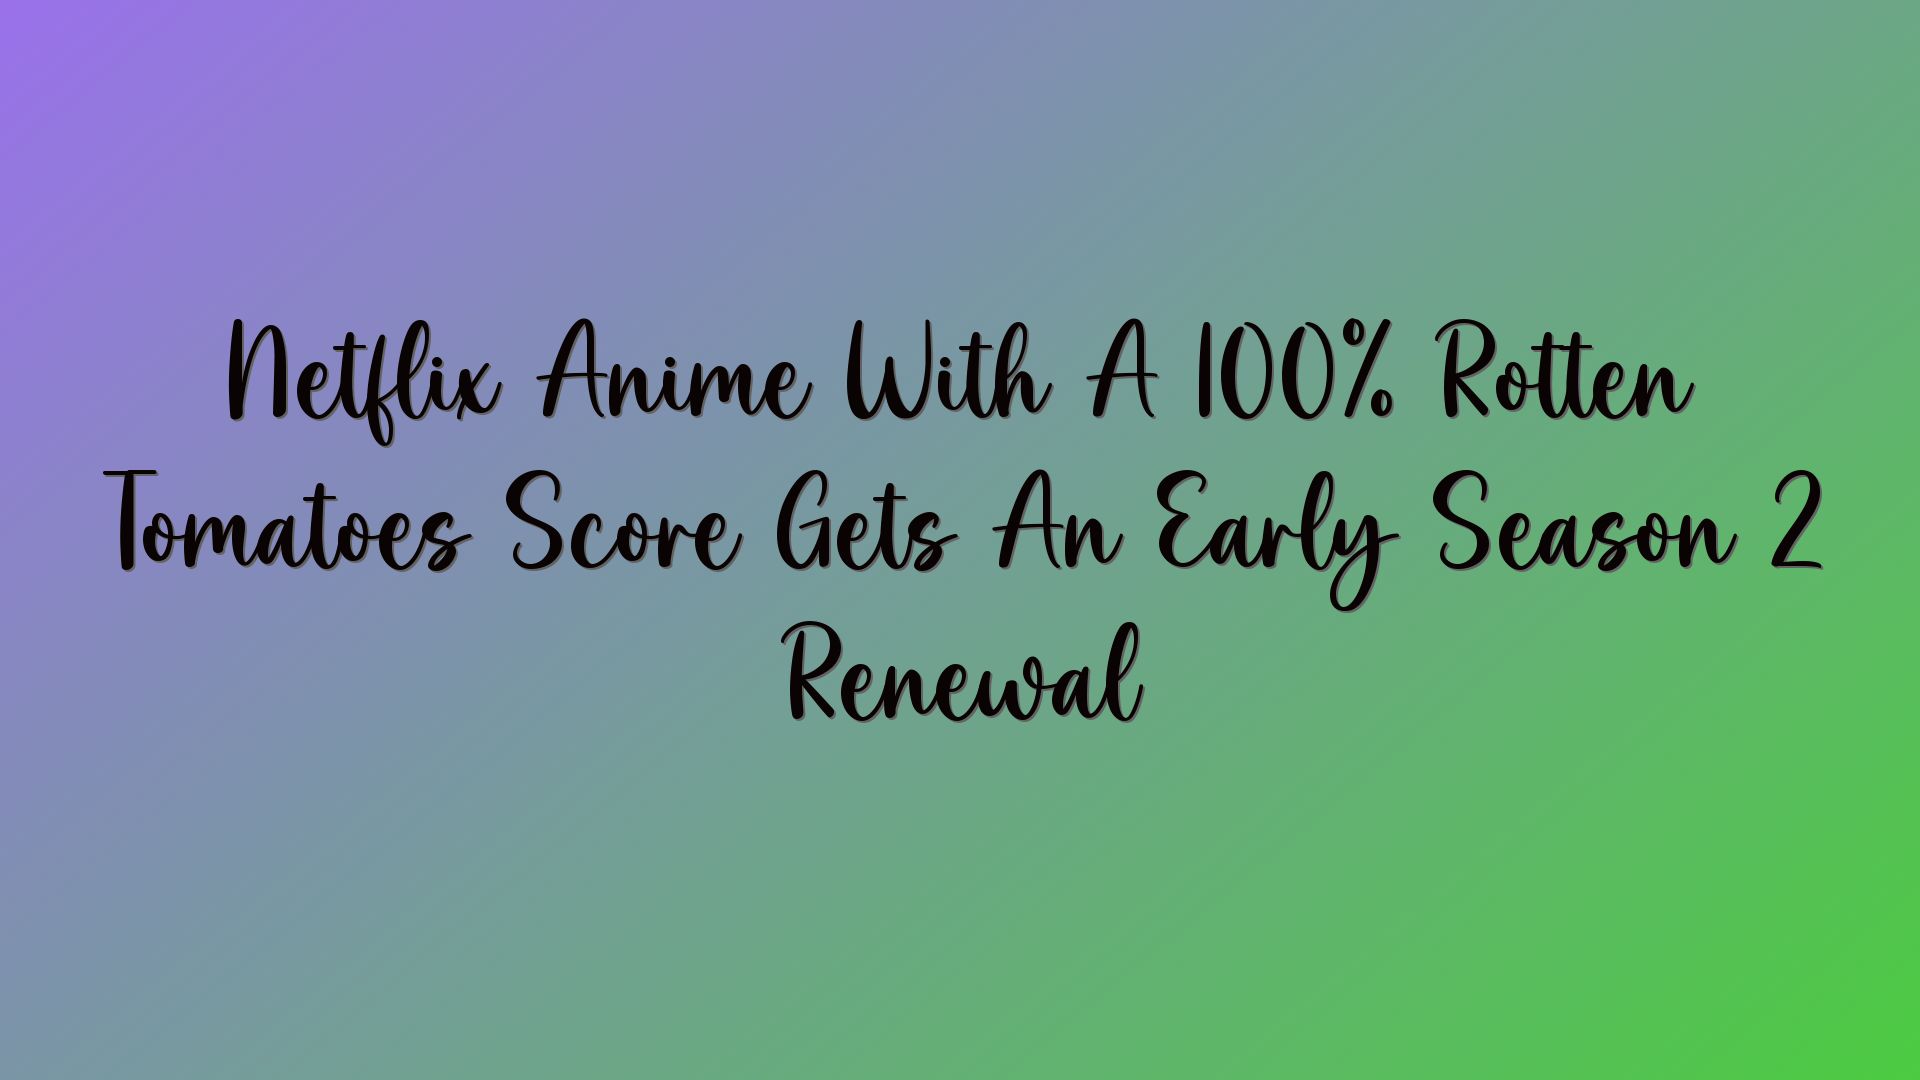 Netflix Anime With A 100% Rotten Tomatoes Score Gets An Early Season 2 Renewal